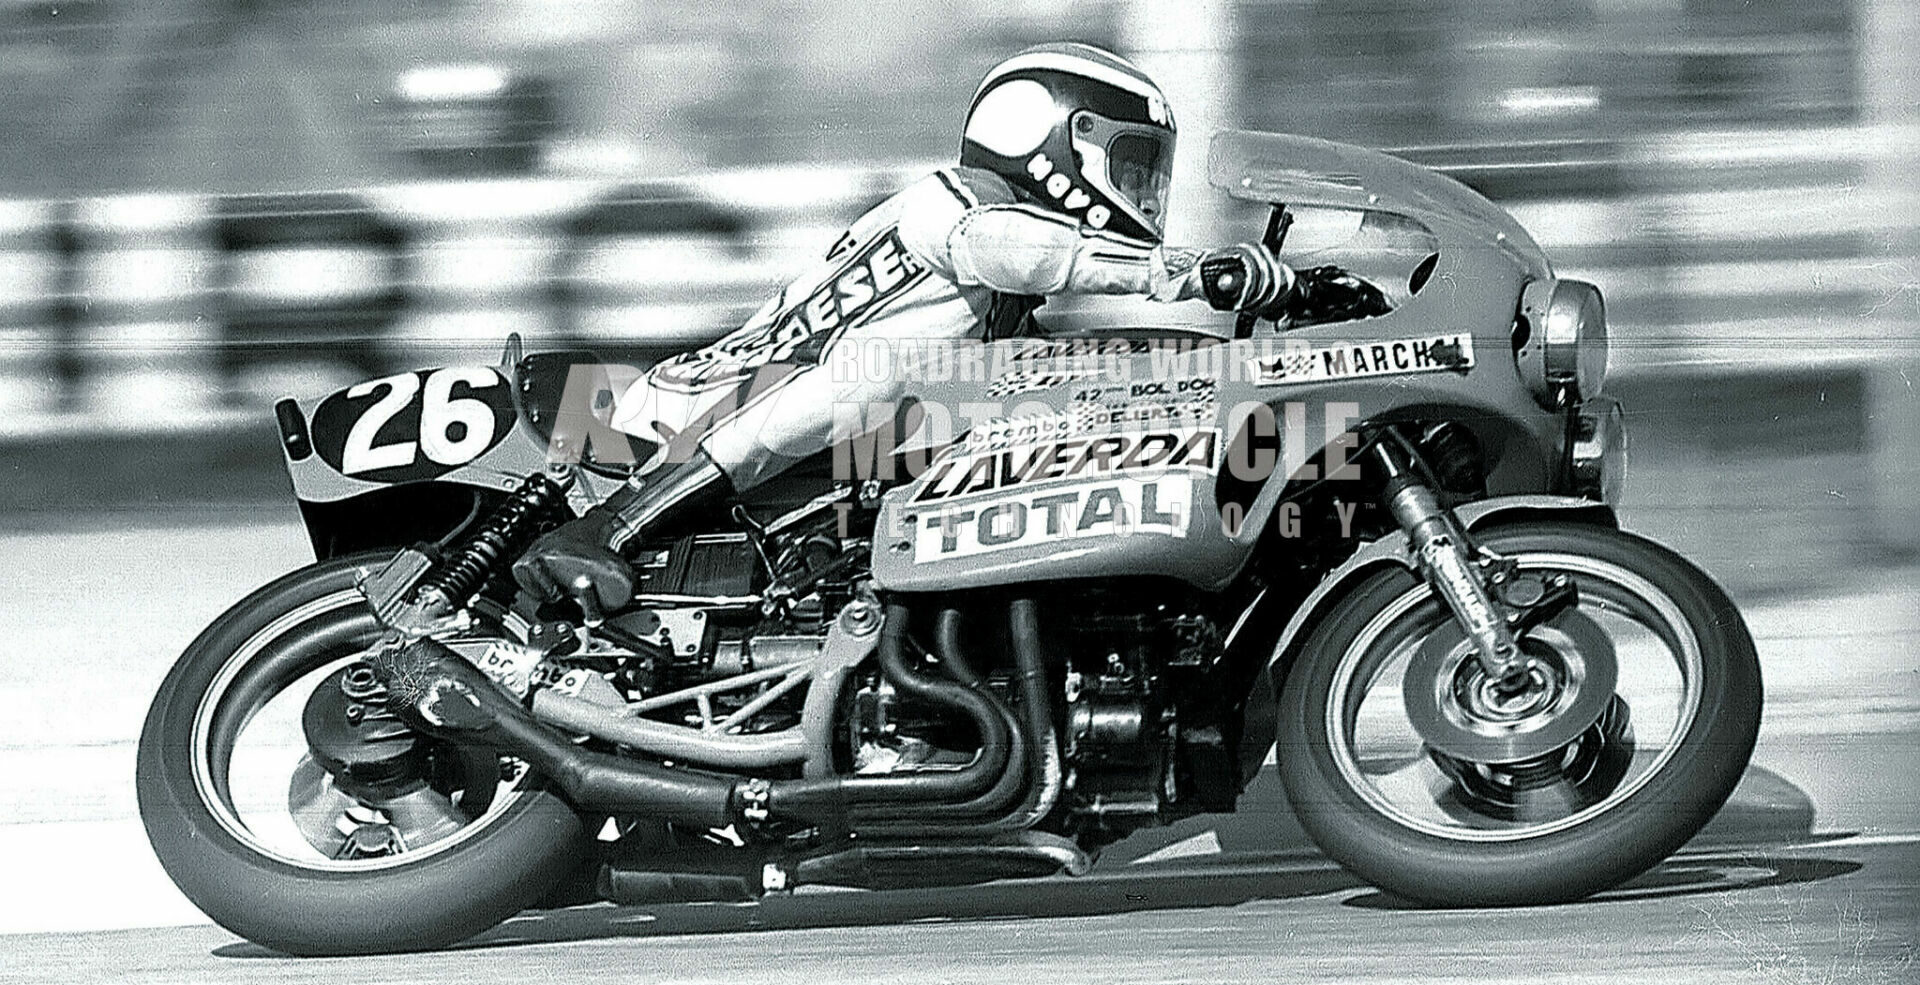 Carlo Perugini on the Laverda V6 1000 in the 1978 Bol d'Or 24-hour World Endurance race. The bike had 20 mph more top speed than any other machine, but DNF with driveshaft issues. Photo courtesy Laverda.  